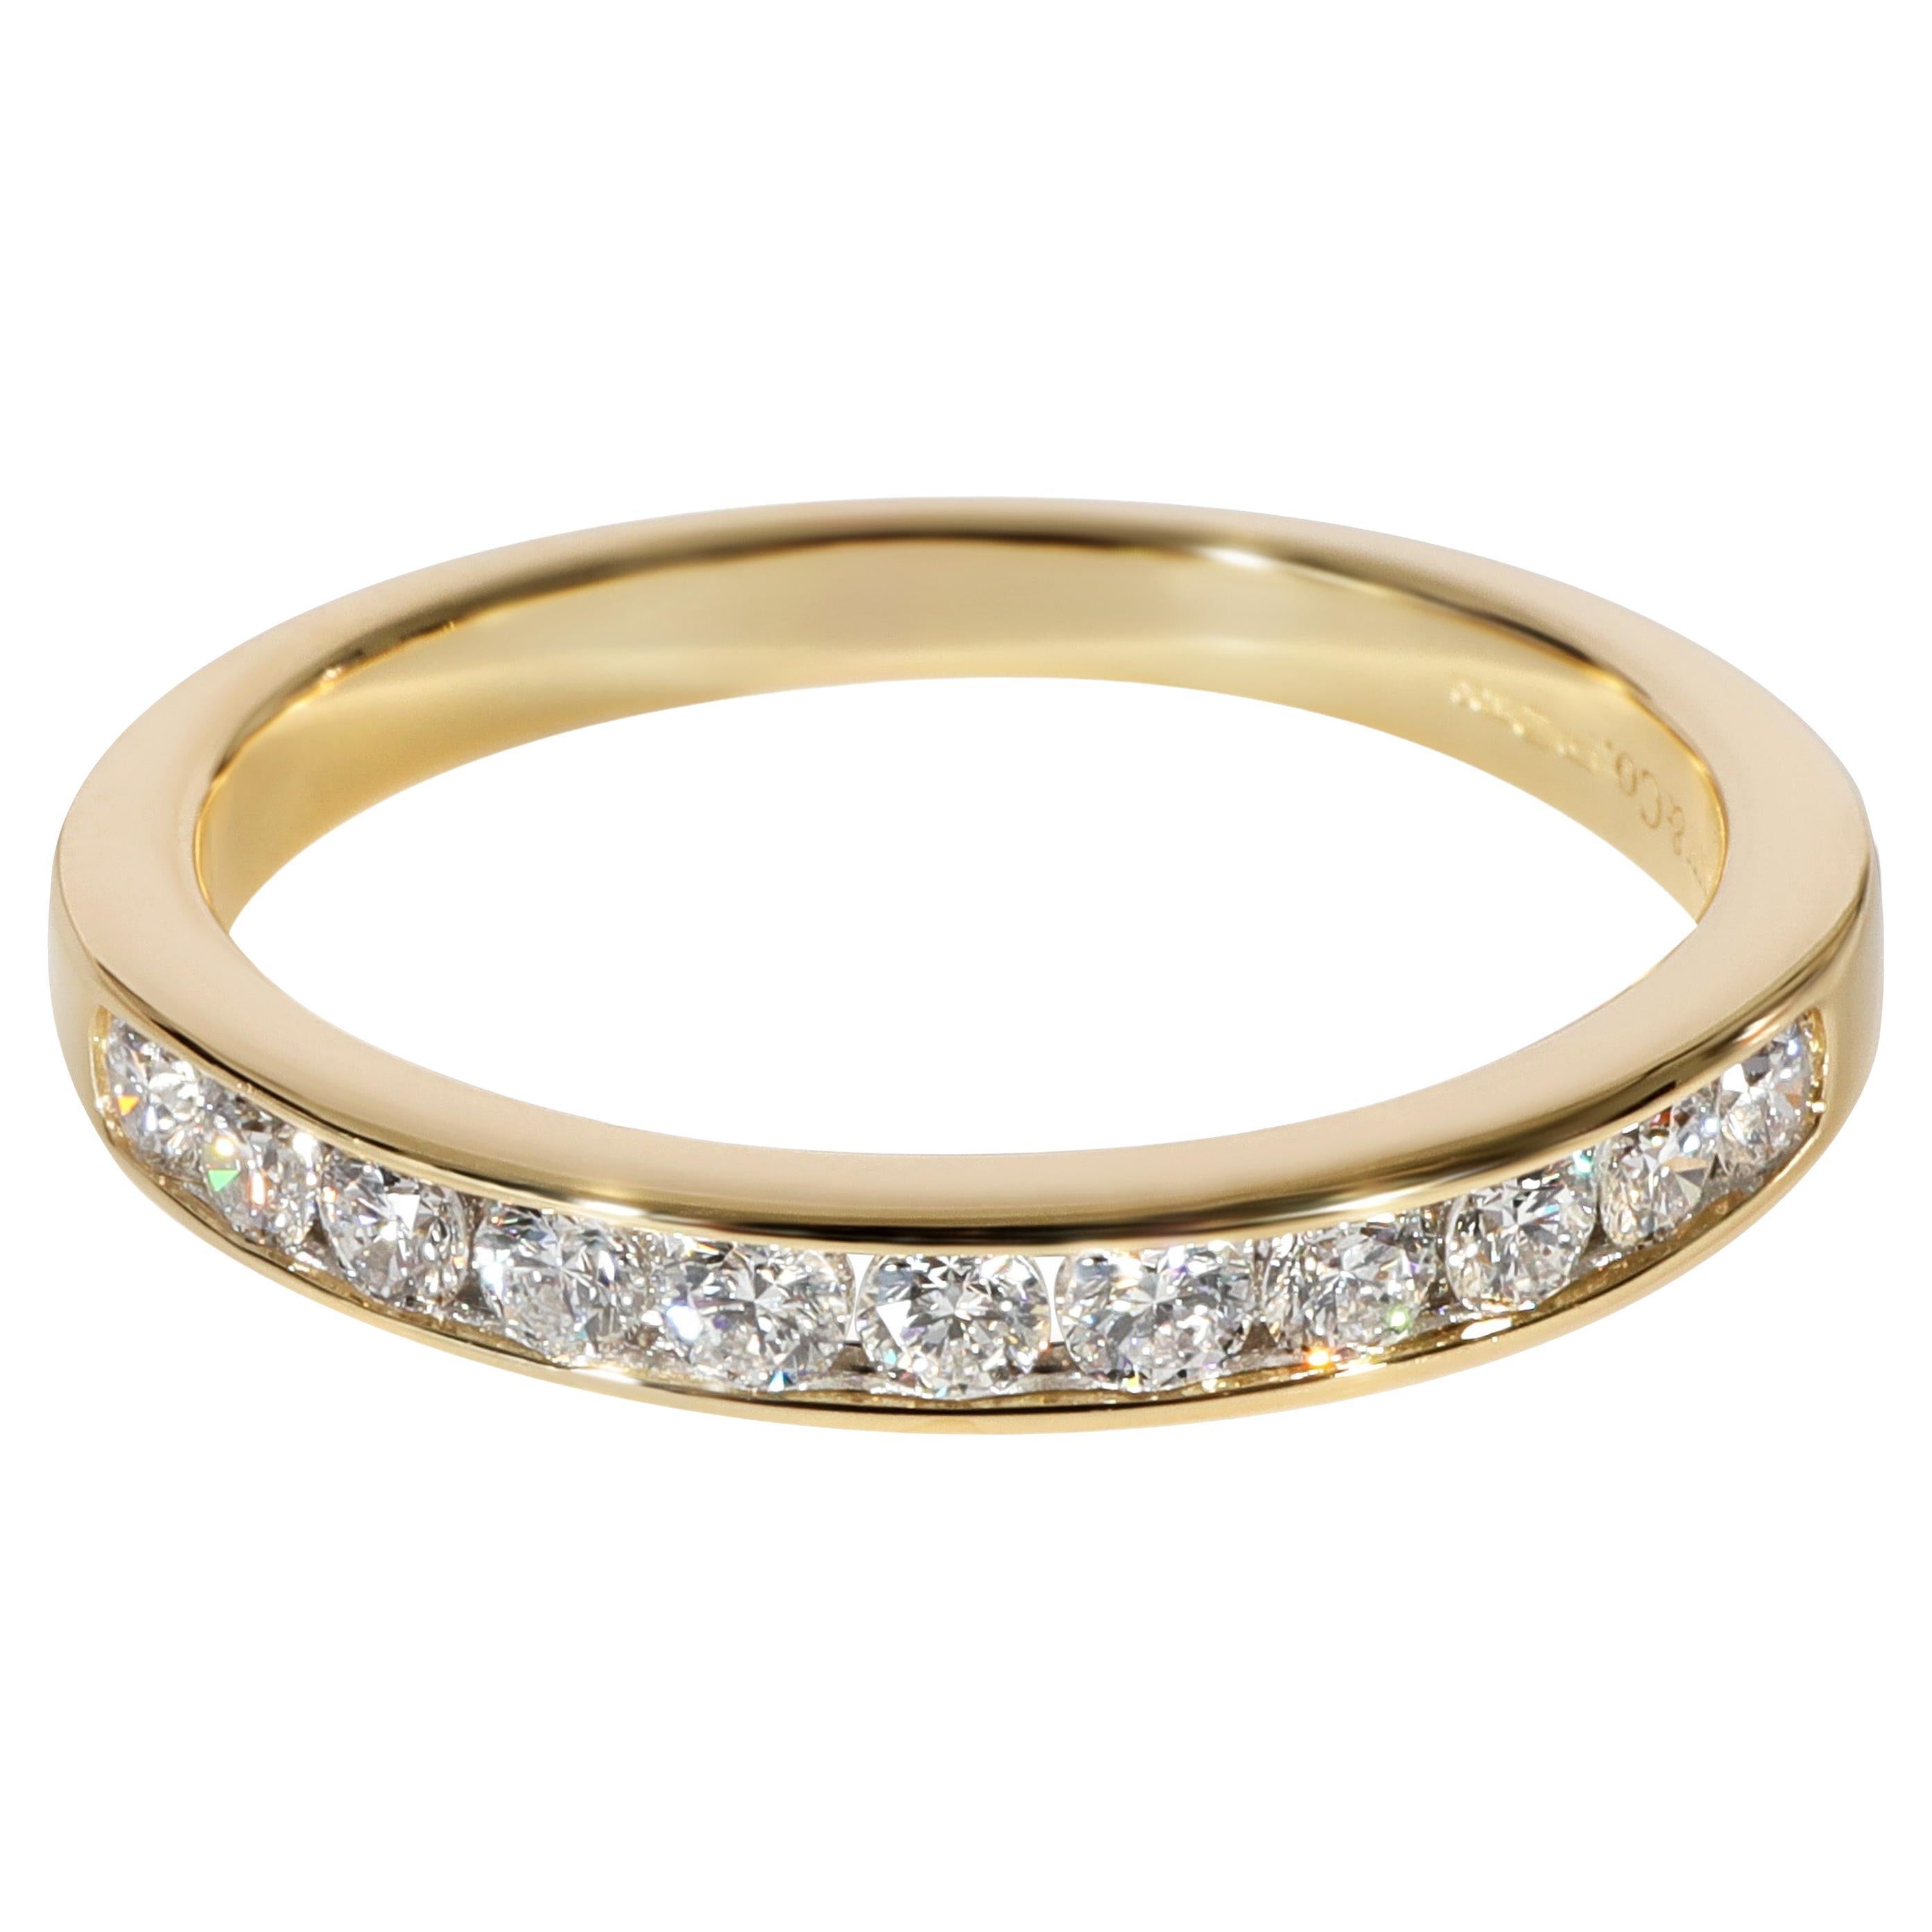 Tiffany & Co. Diamond Wedding Band in 18k Yellow Gold 0.39 Ctw For Sale